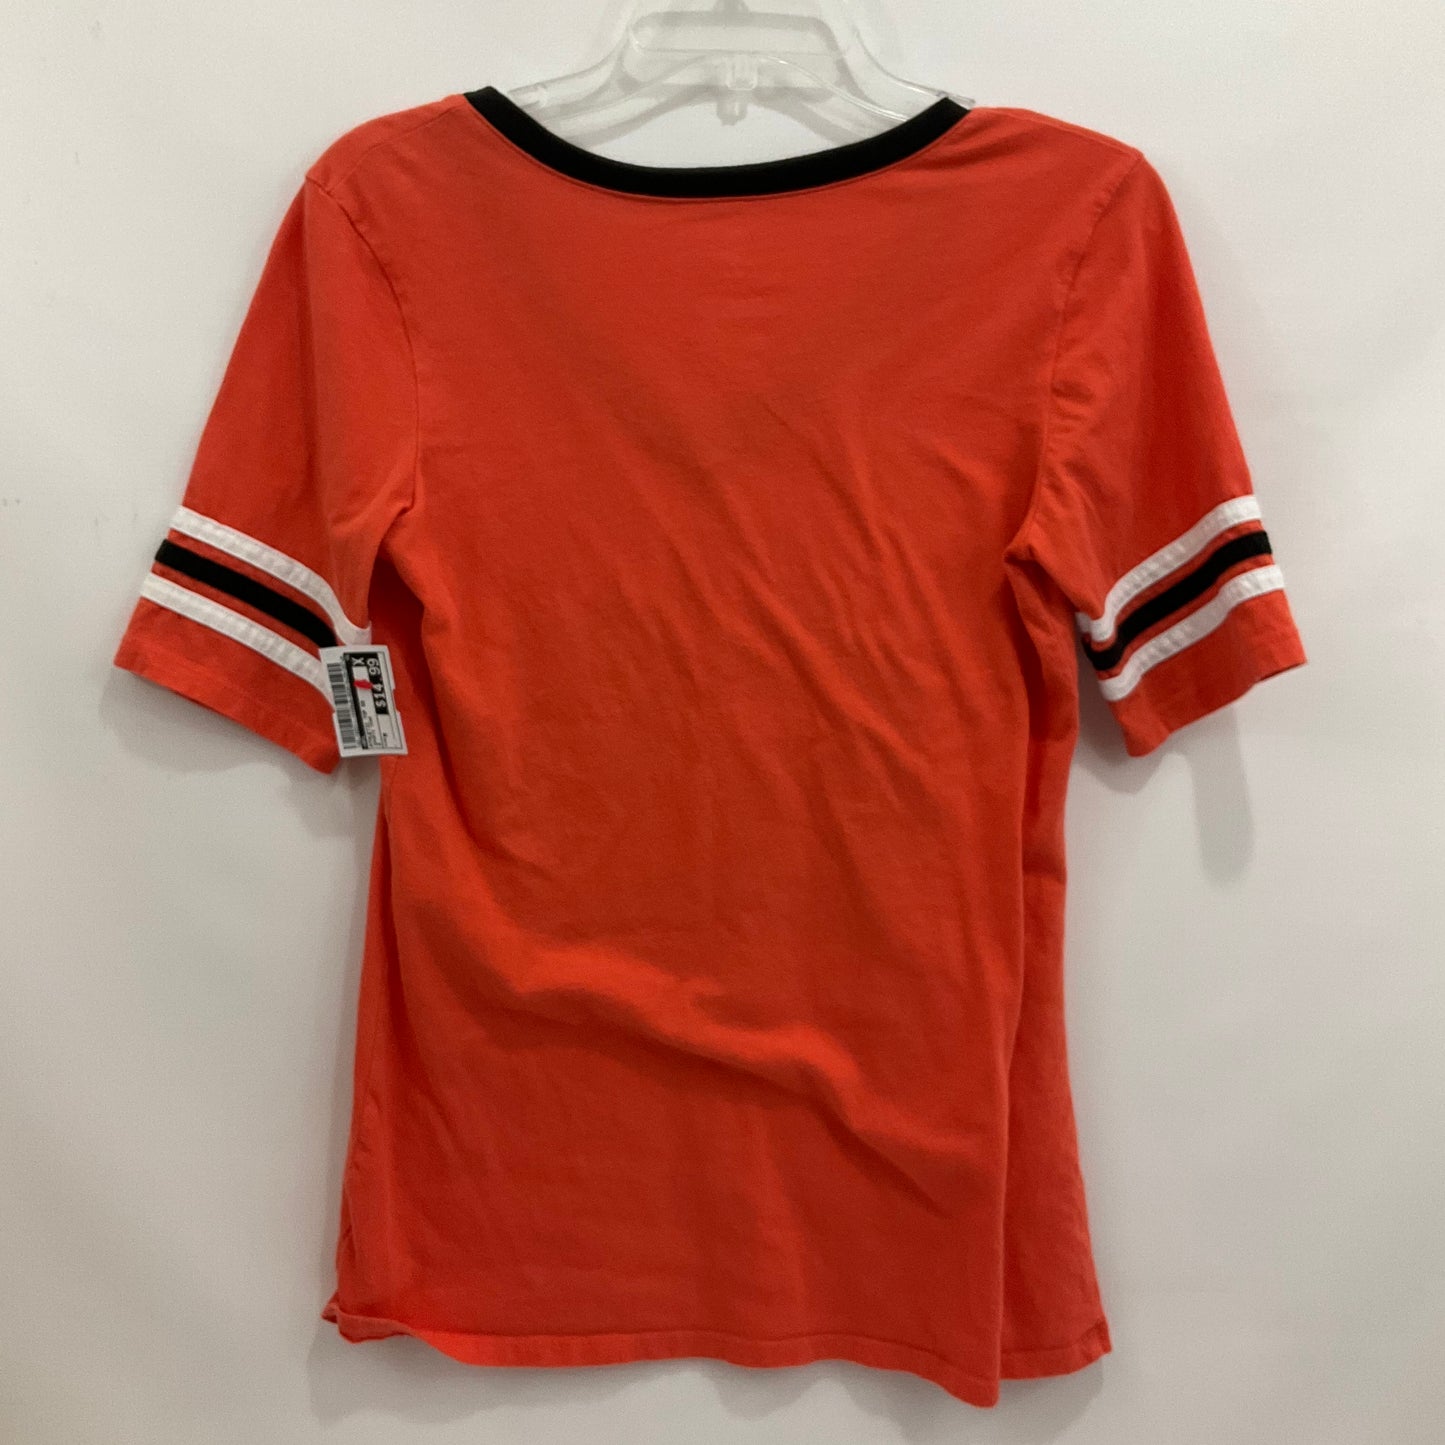 Bengals Athletic Top Short Sleeve By Nfl  Size: M